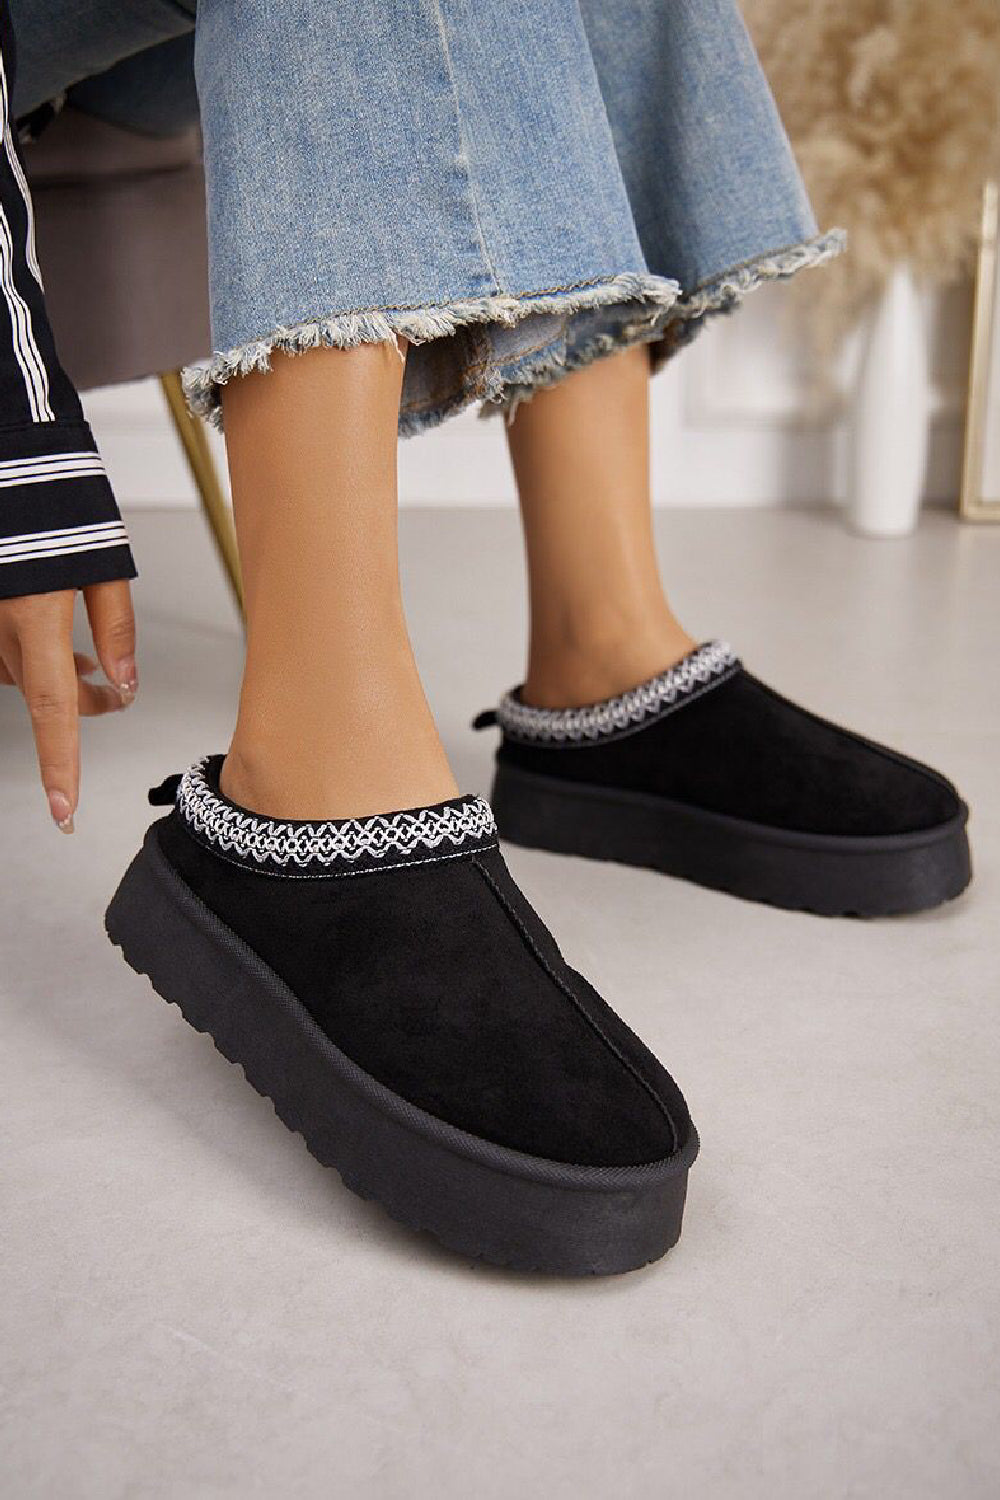 BLACK FLUFFY PLATFORM SLIPPERS FAUX FUR LINED ANKLE BOOTS